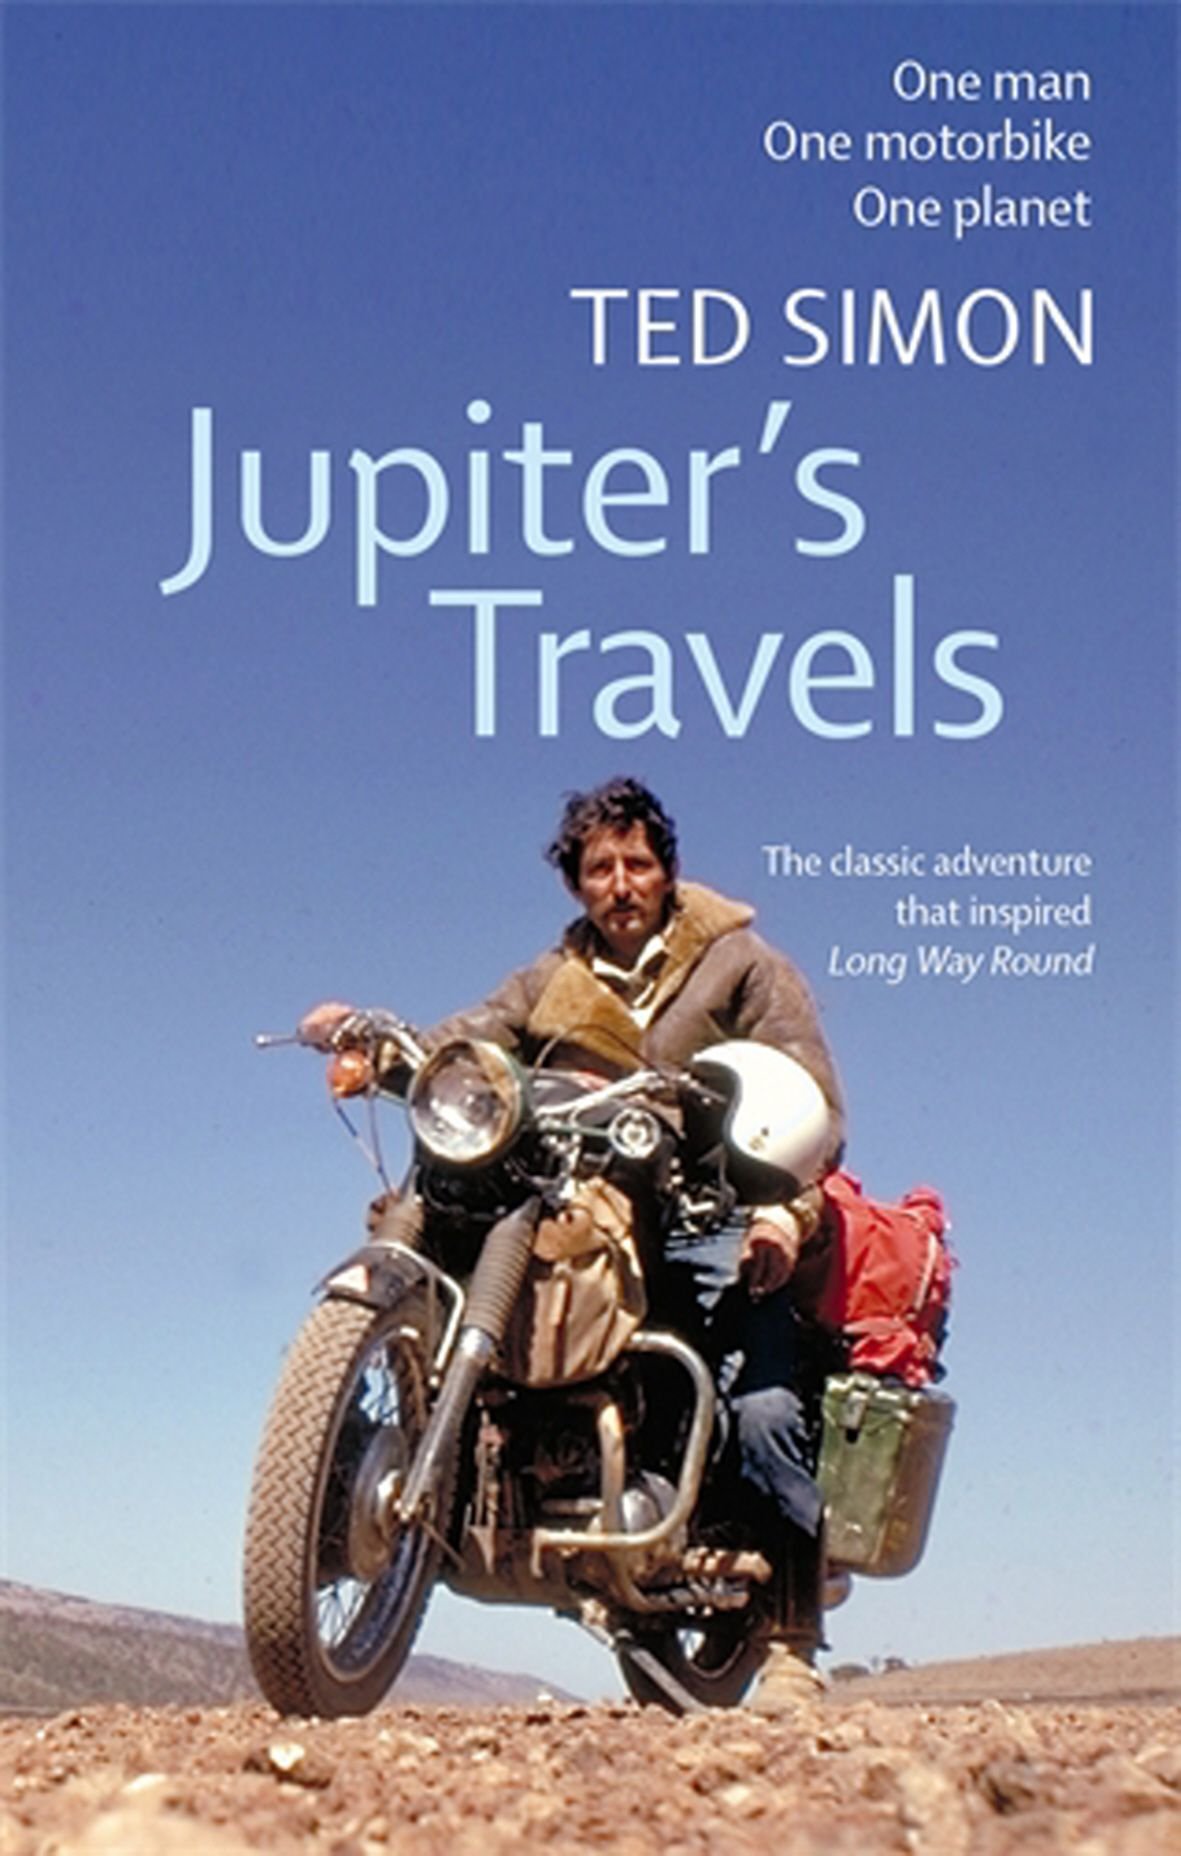 These Travel Books Will Inspire You To Adventure! - Travel Tramp